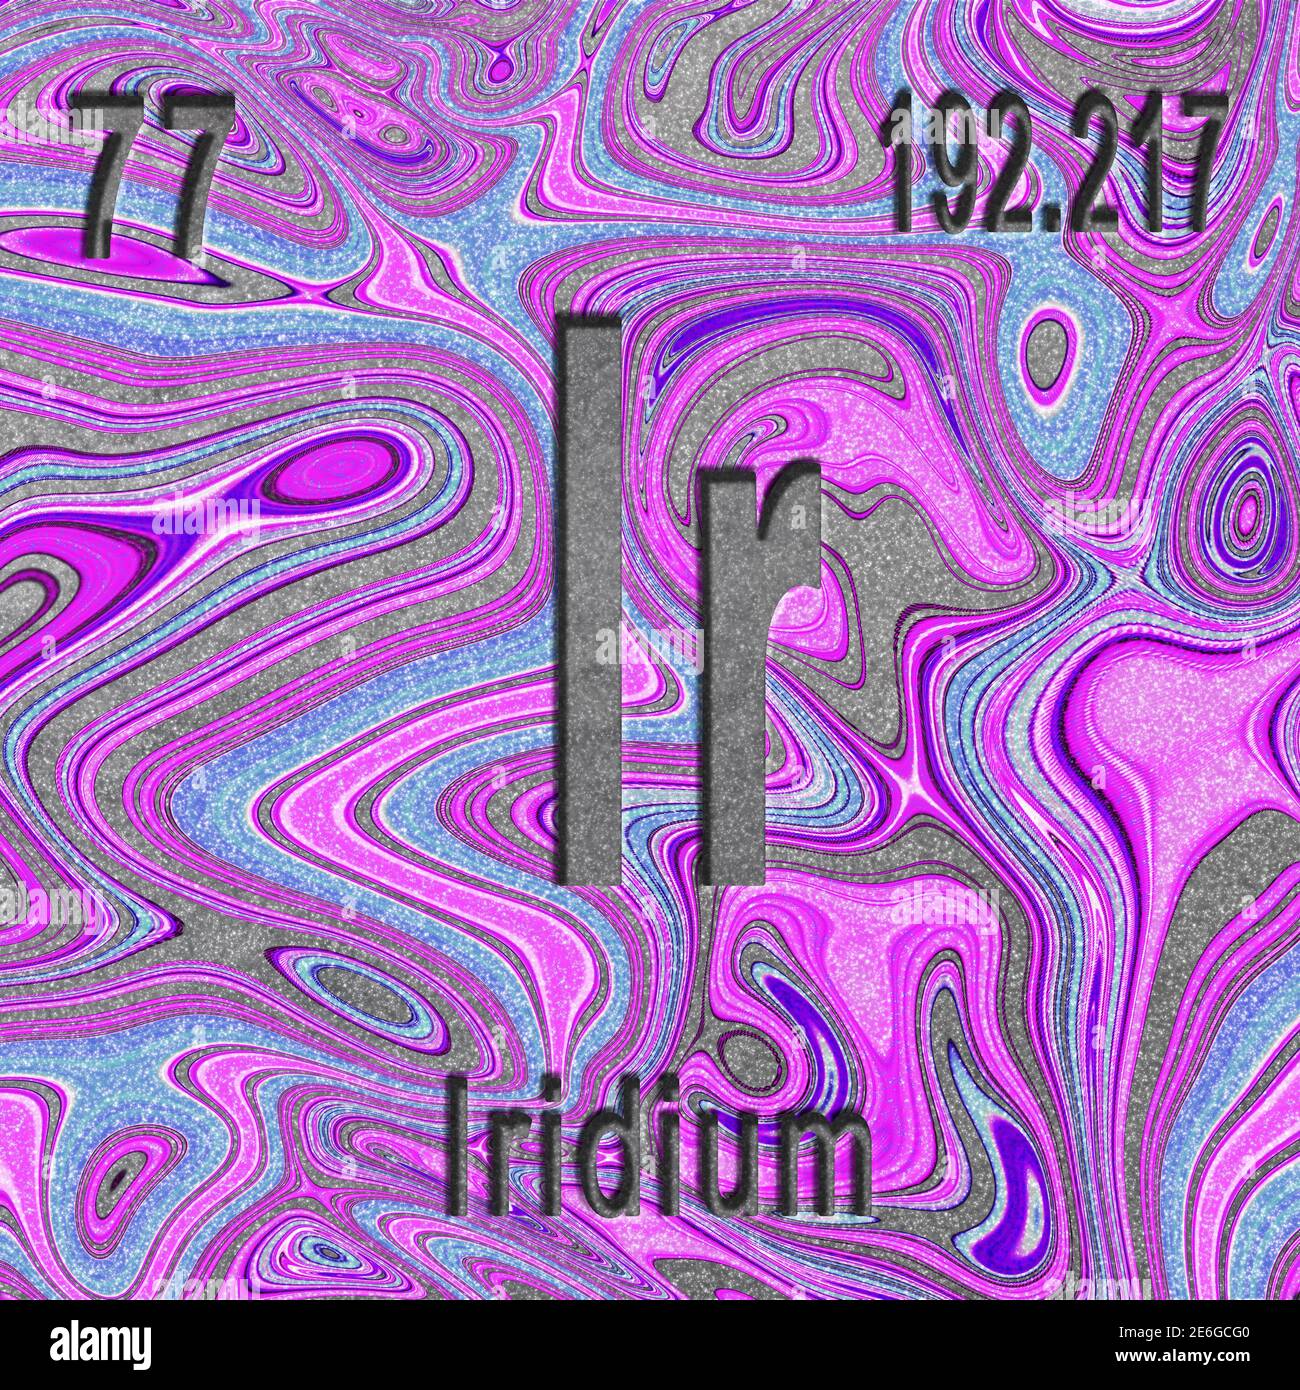 Iridium chemical element, Sign with atomic number and atomic weight, purple background, Periodic Table Element Stock Photo